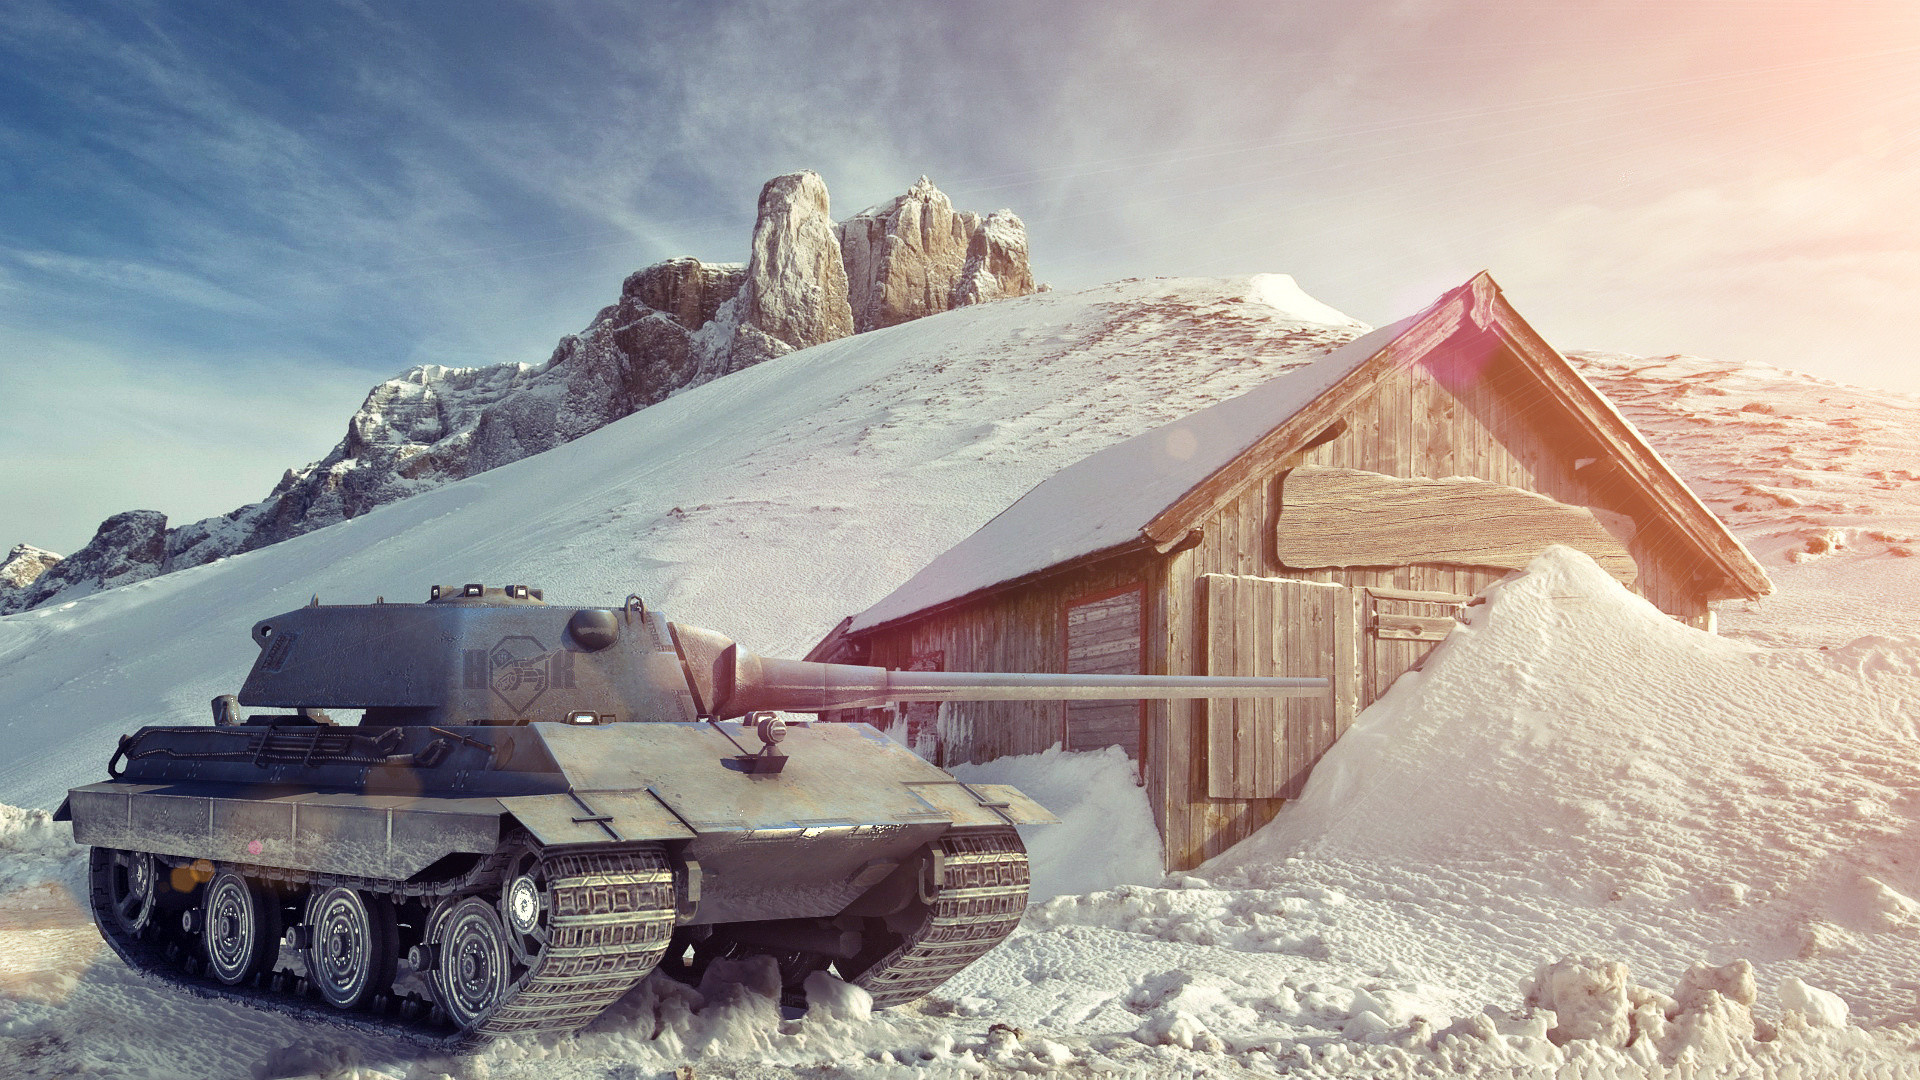 1920x1080 World of tanks Snow Environment Wallpaper - http://www.gbwallpapers.com